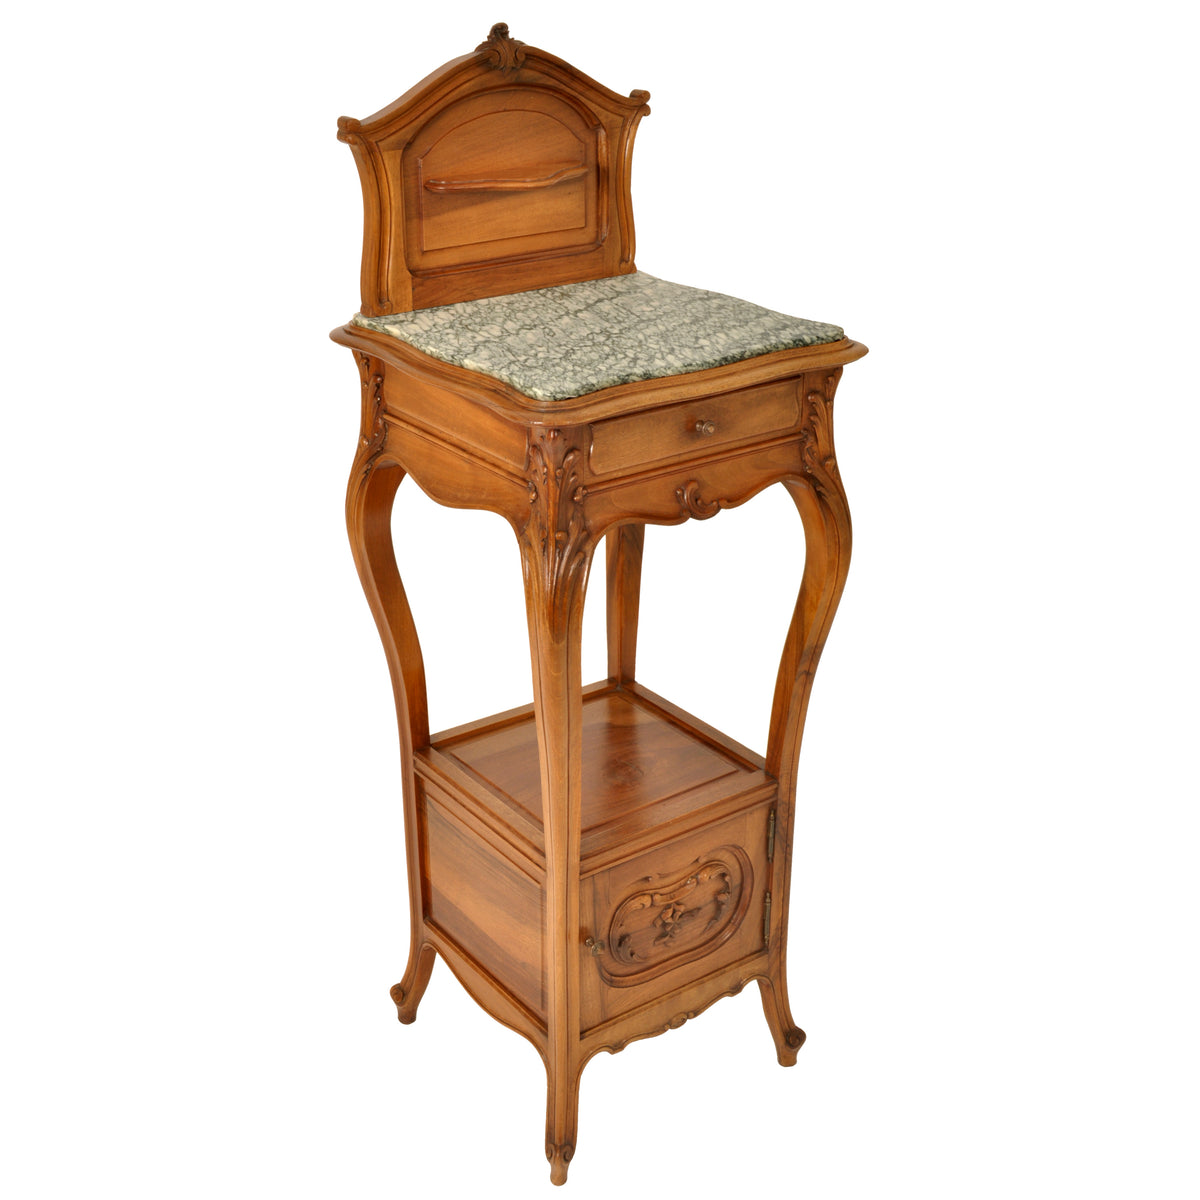 Antique French Provincial Art Nouveau Walnut & Marble Nightstand Side Table circa 1900